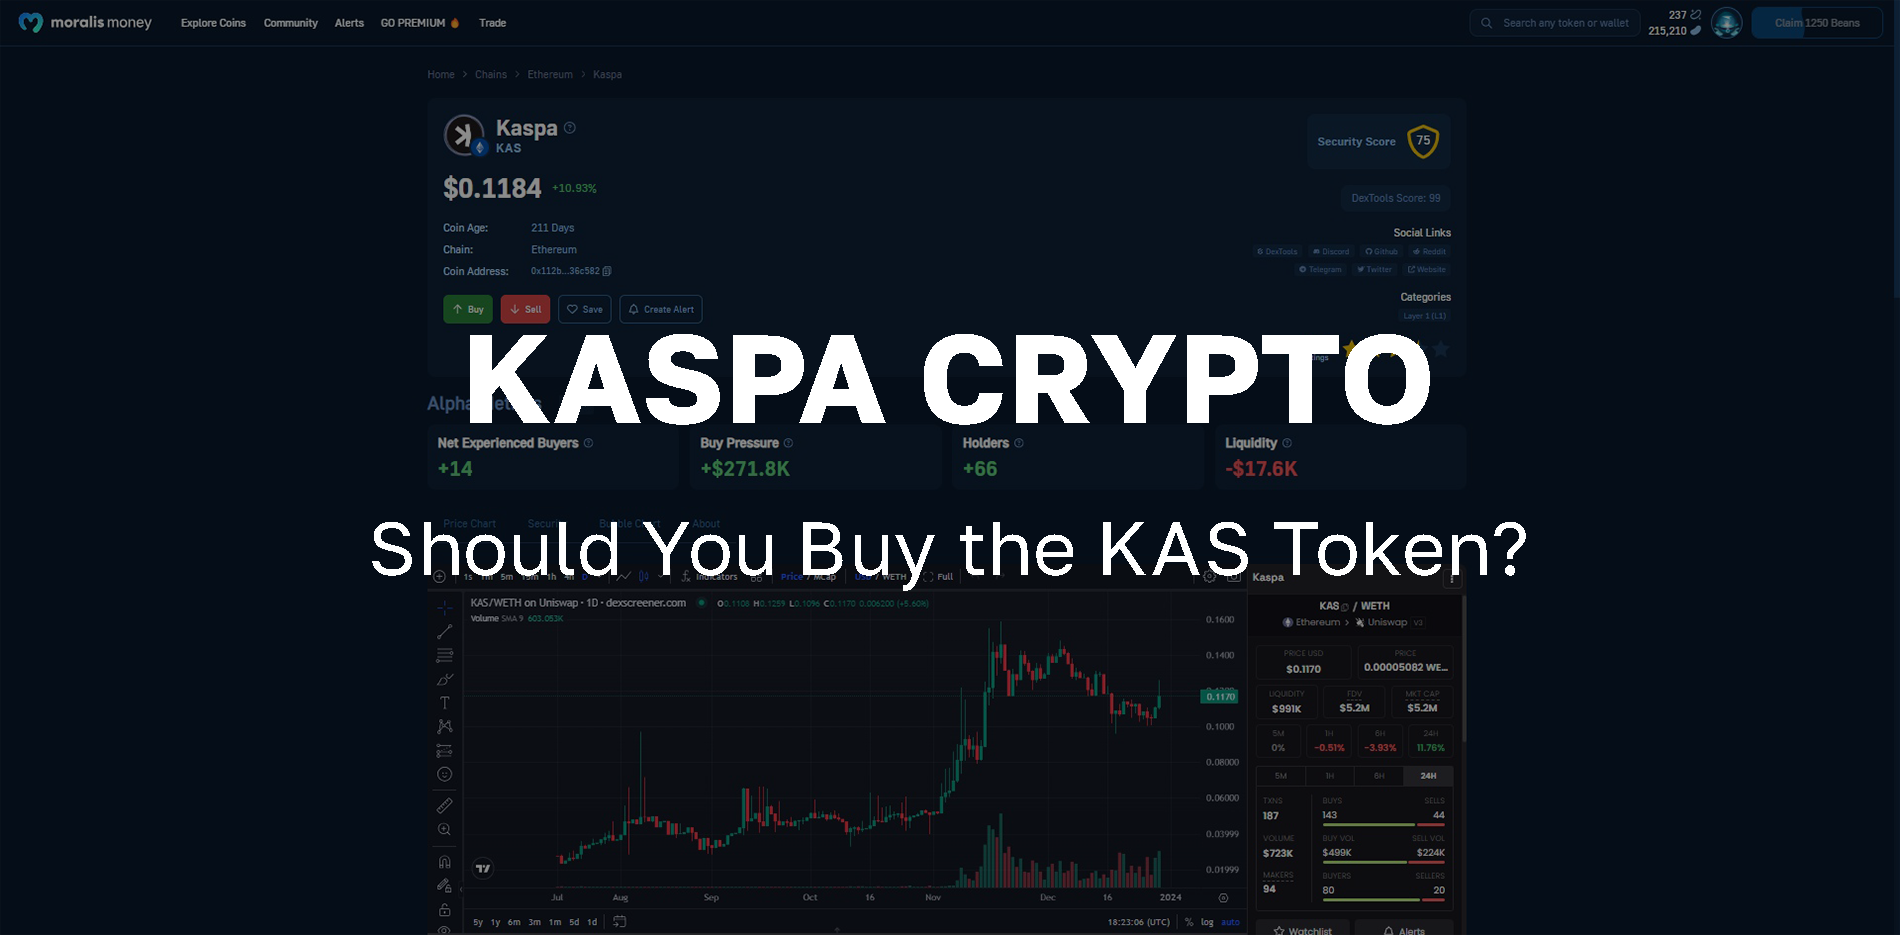 Should You Buy the Kaspa Crypto On-Chain Trading Signals for the KAS Token - article featured image